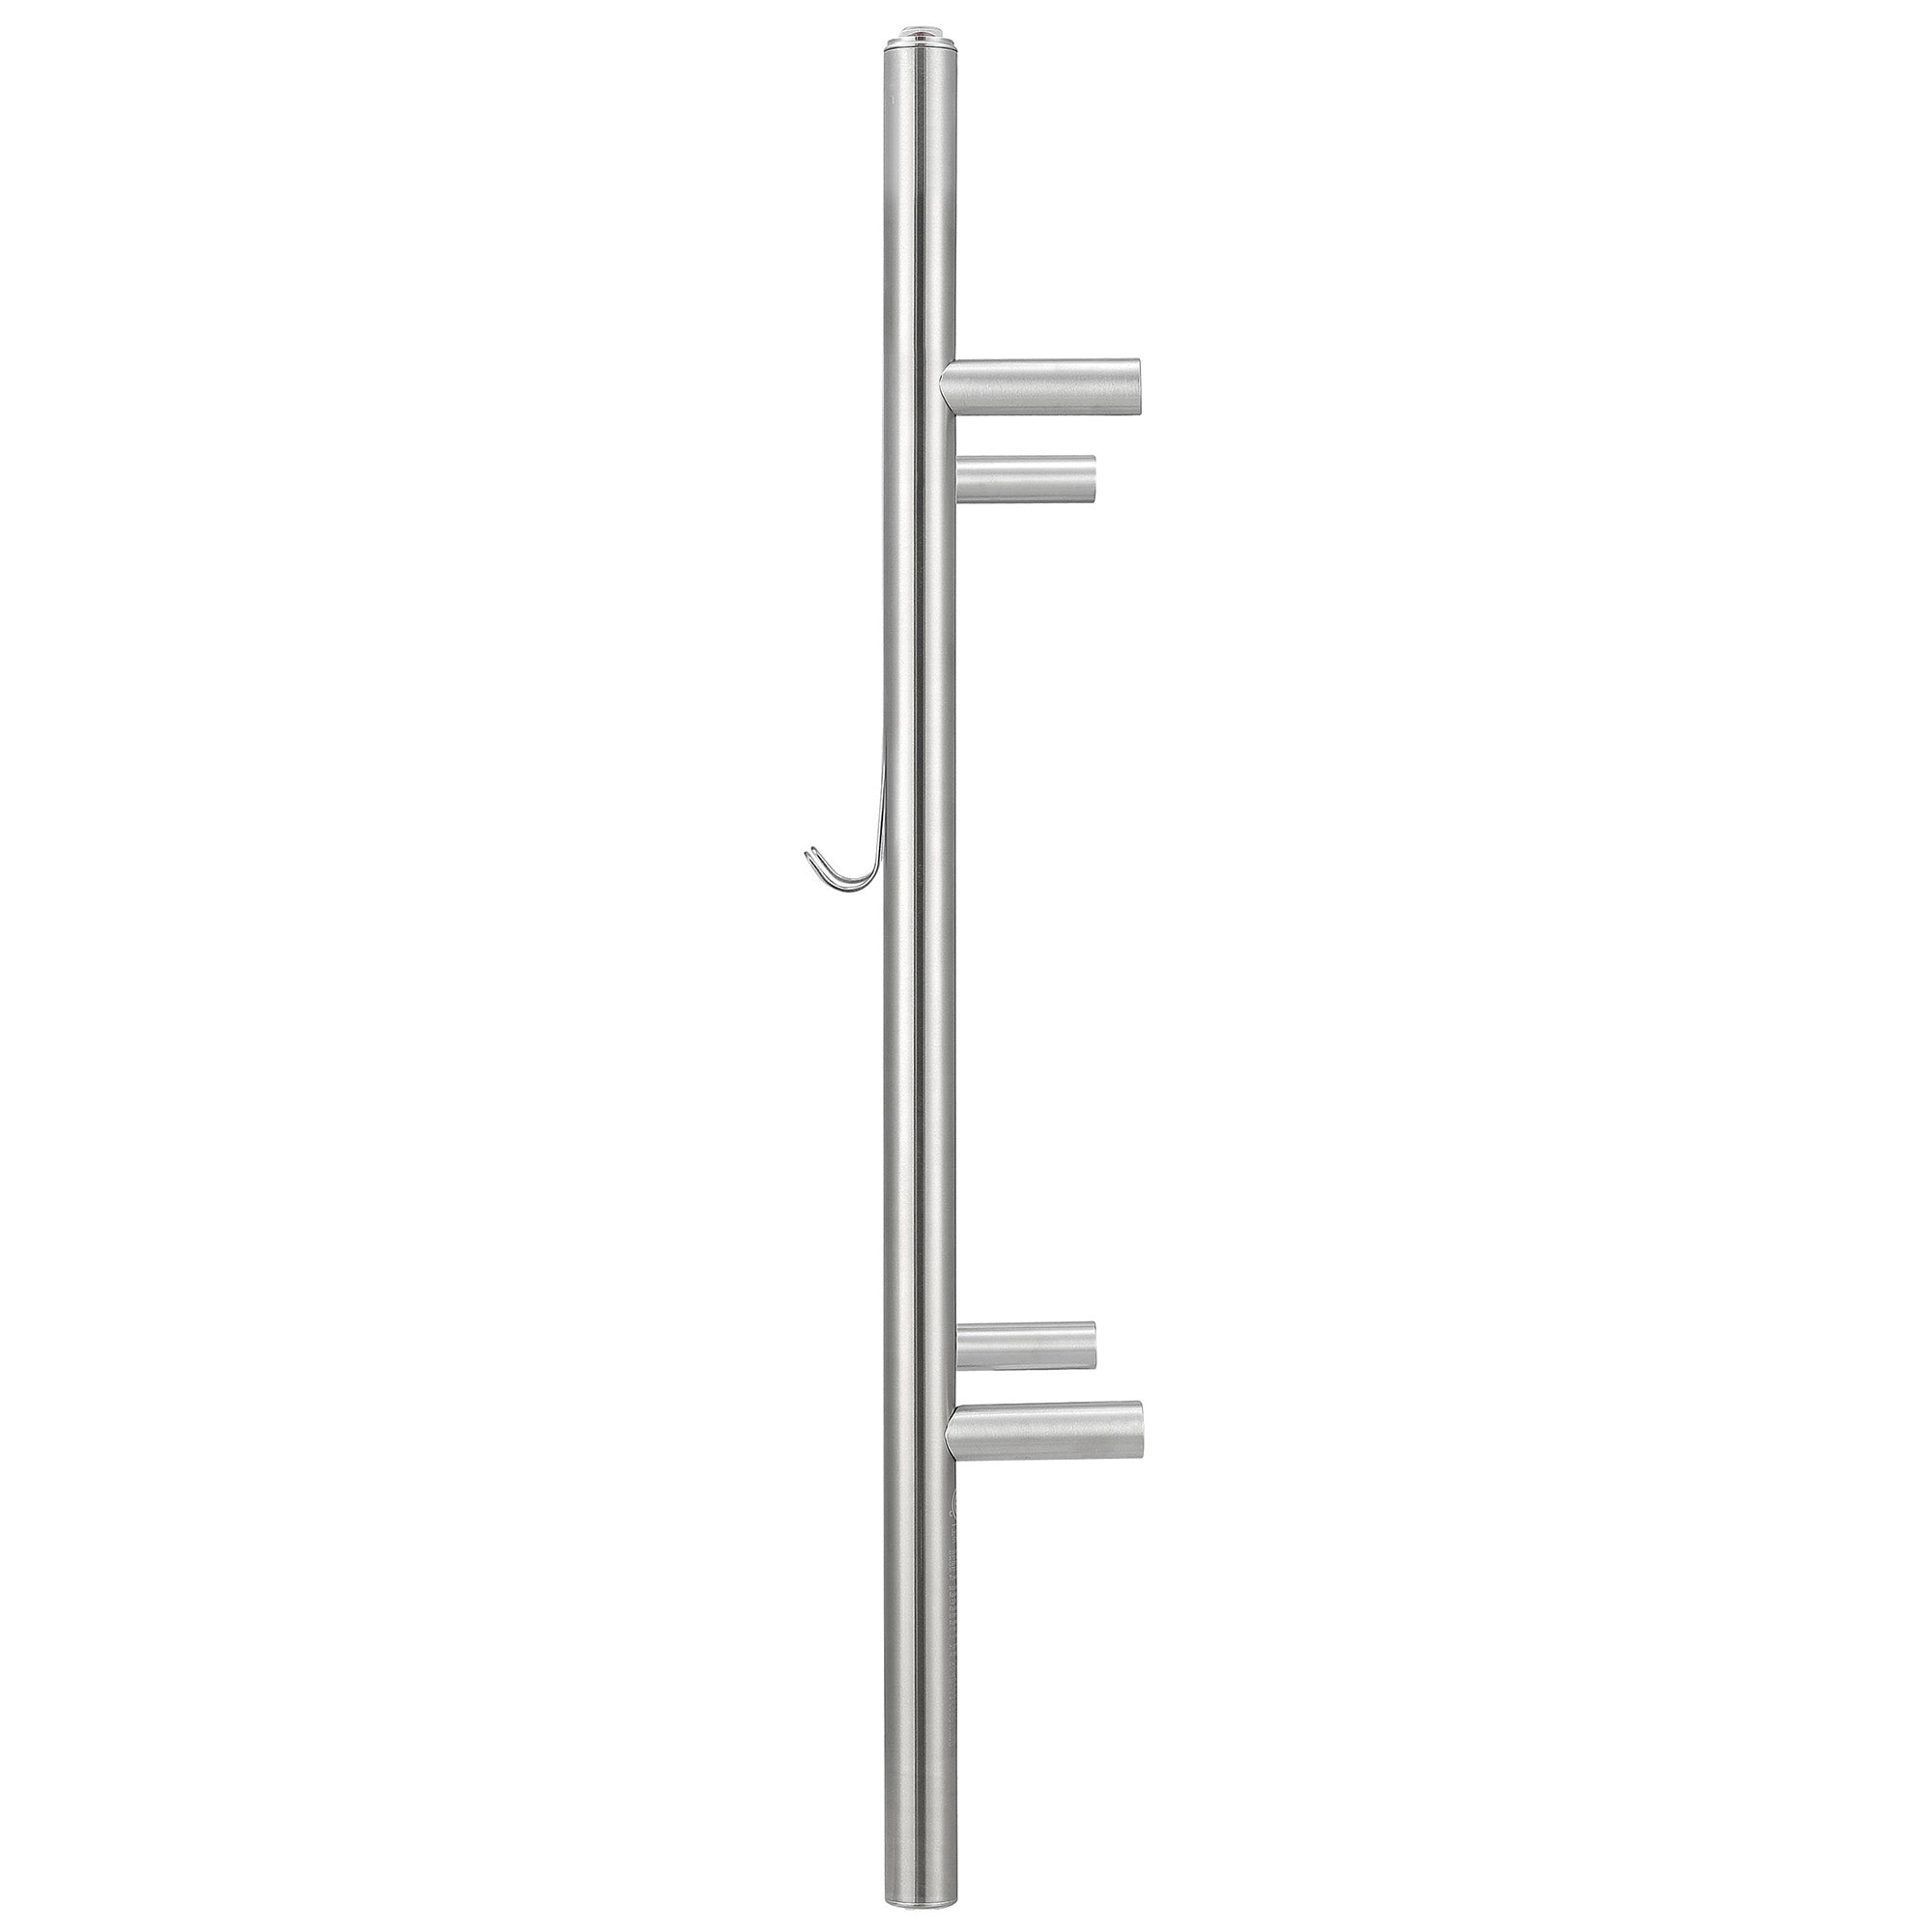 Ancona Comfort Dual 6-Bar Hardwired and Plug-in Towel Warmer with 2 Adjustable Hooks in Brushed Stainless Steel